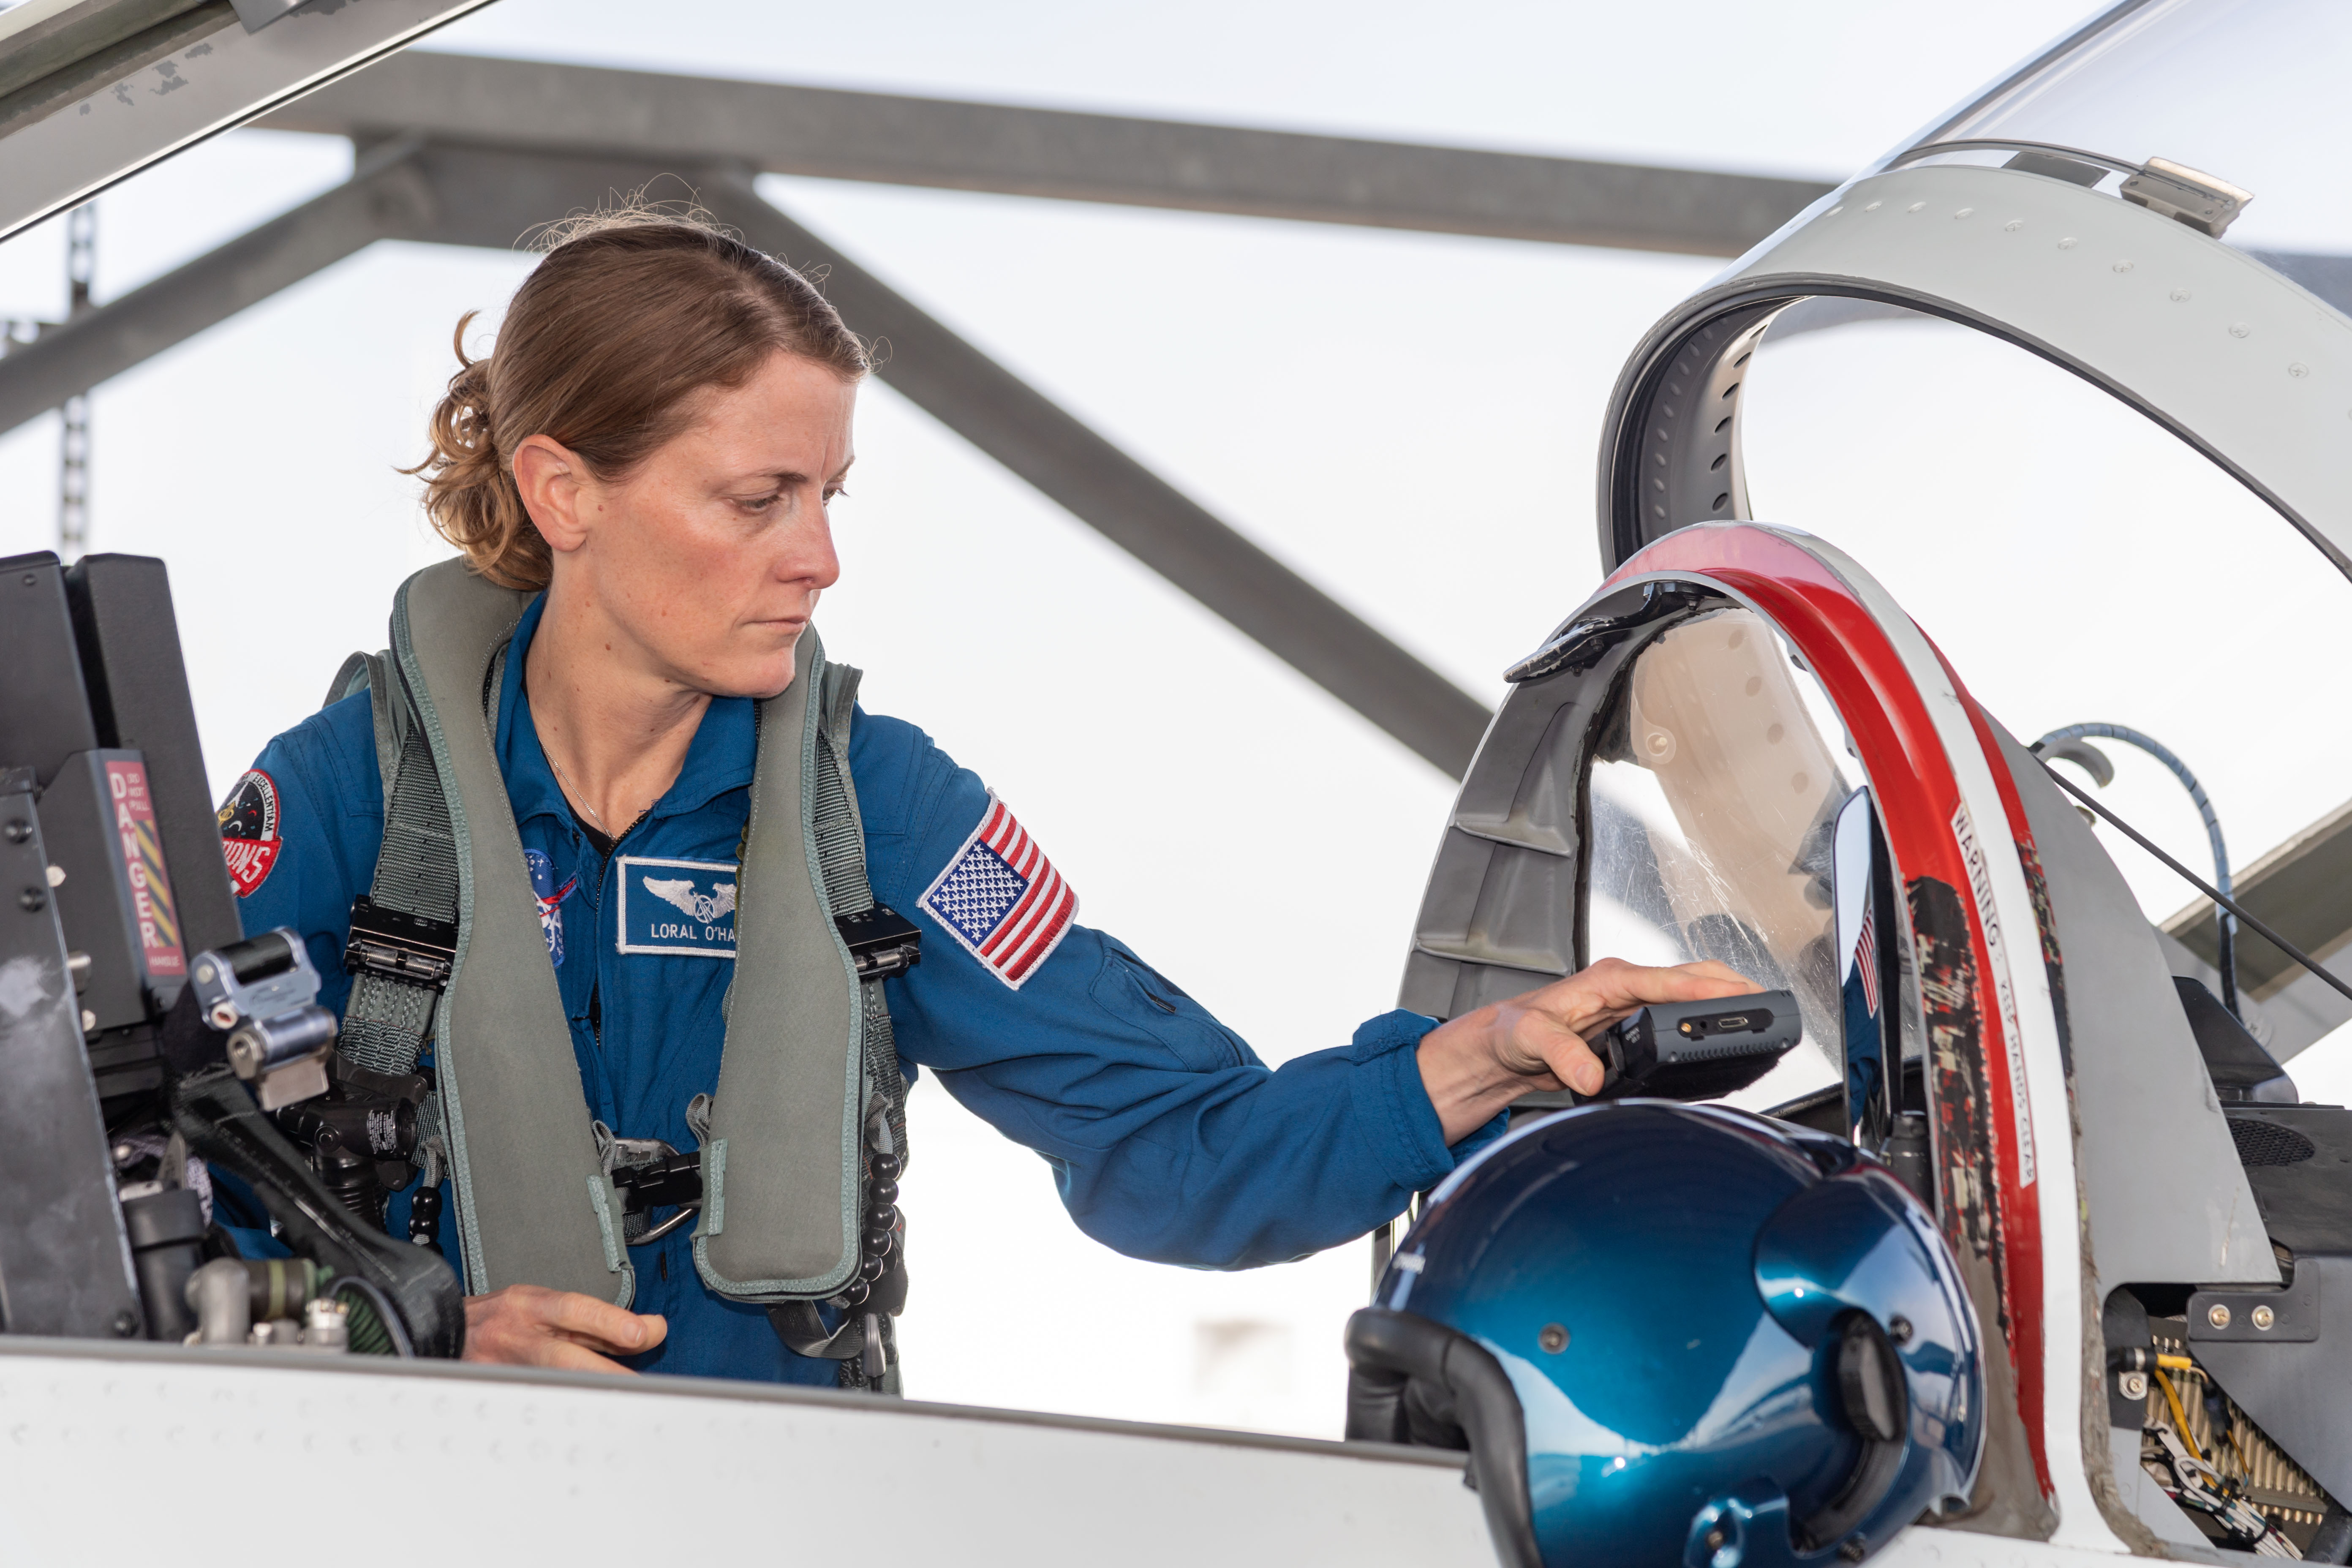 NASA astronaut Loral O'Hara conducts preflight training aboard a T-38 trainer jet at Ellington Field in Houston, Texas, before beginning her mission to the International Space Station.